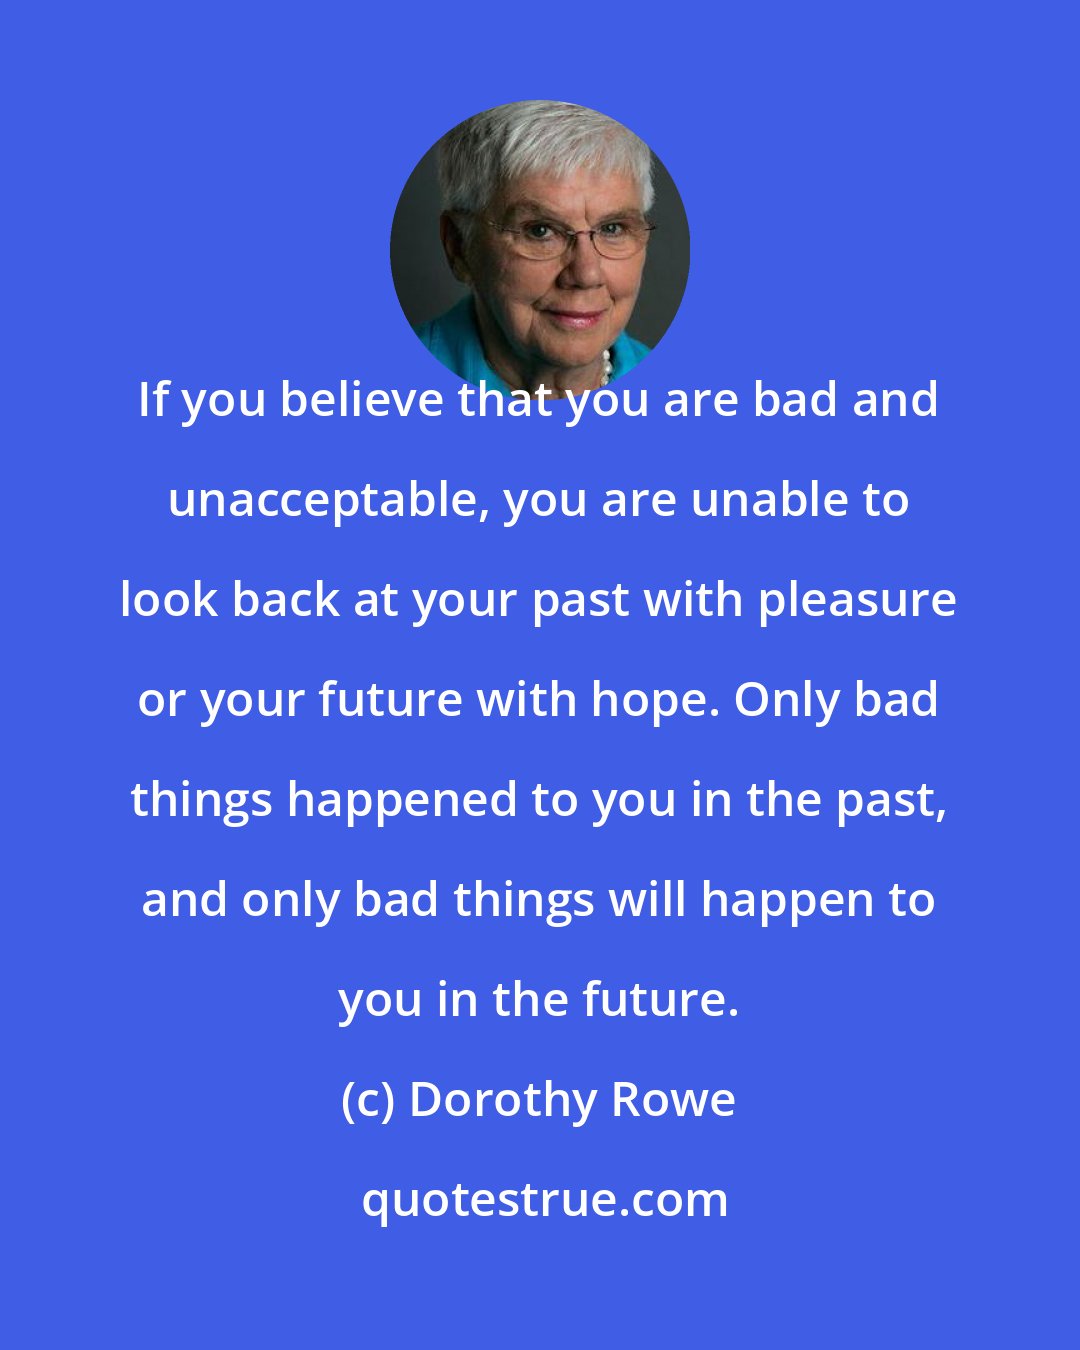 Dorothy Rowe: If you believe that you are bad and unacceptable, you are unable to look back at your past with pleasure or your future with hope. Only bad things happened to you in the past, and only bad things will happen to you in the future.